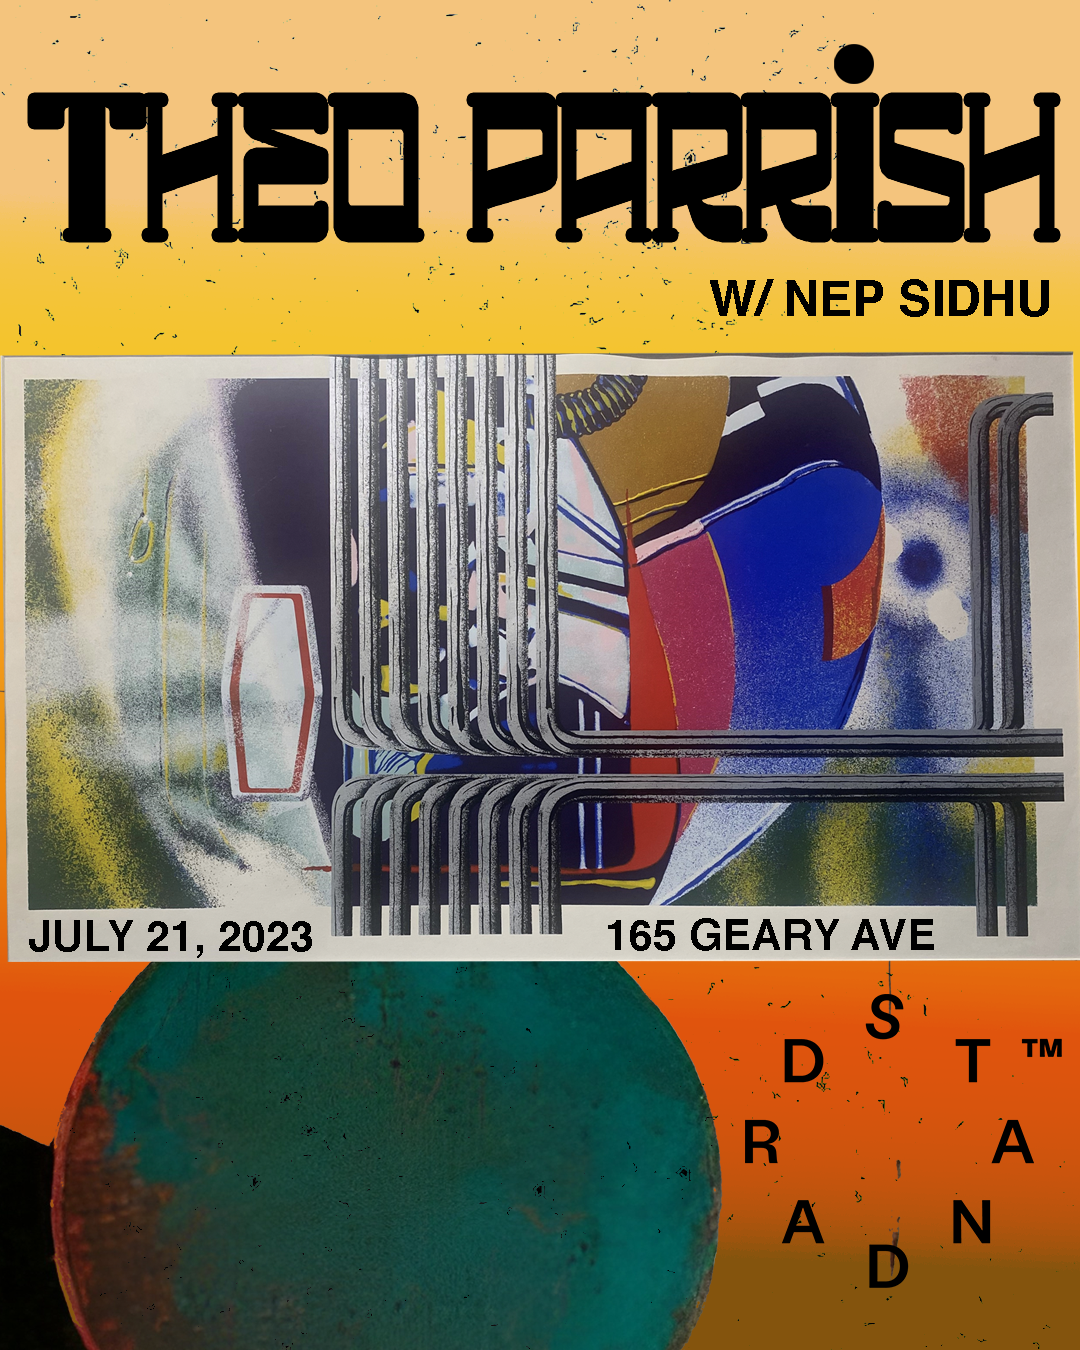 038: Theo Parrish and Nep Sidhu at Standard Time, Toronto